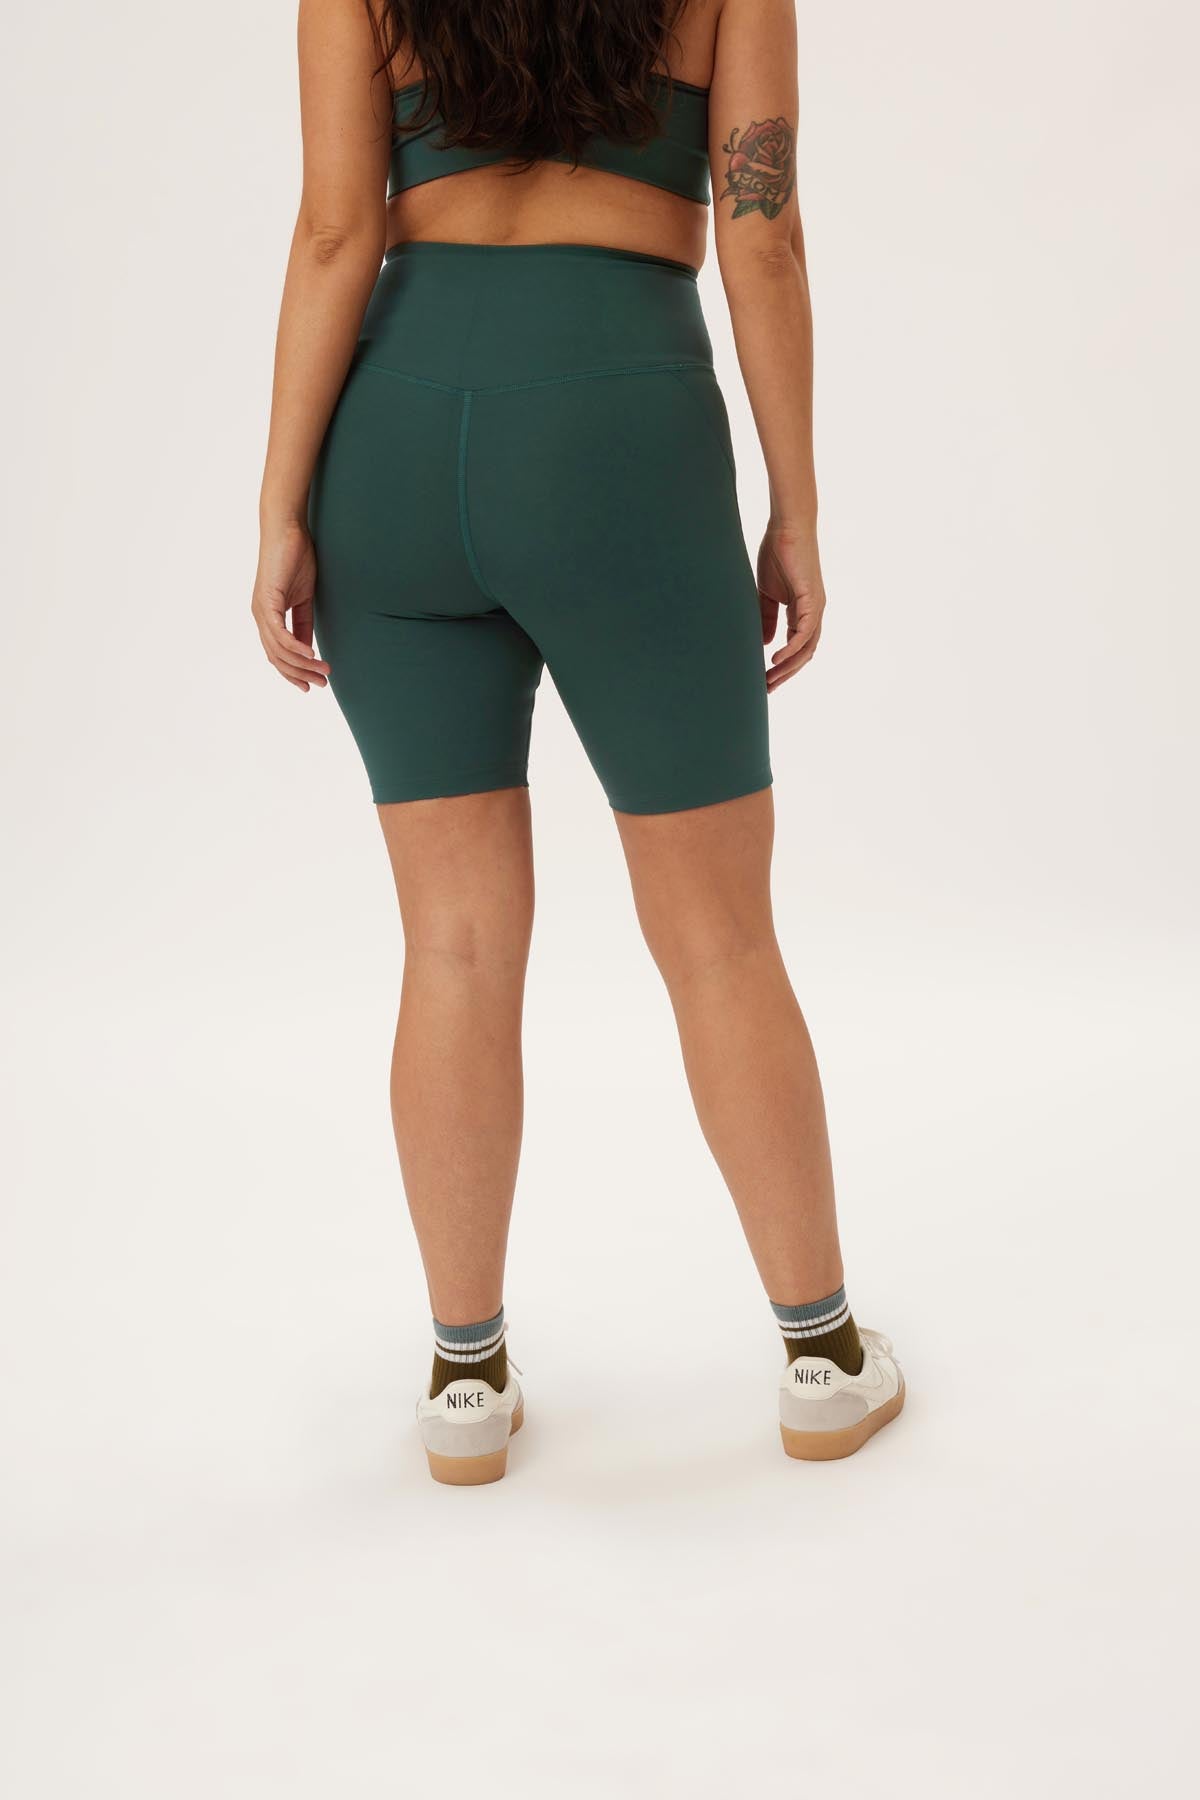 GIRLFRIEND COLLECTIVE + NET SUSTAIN Bike stretch recycled shorts